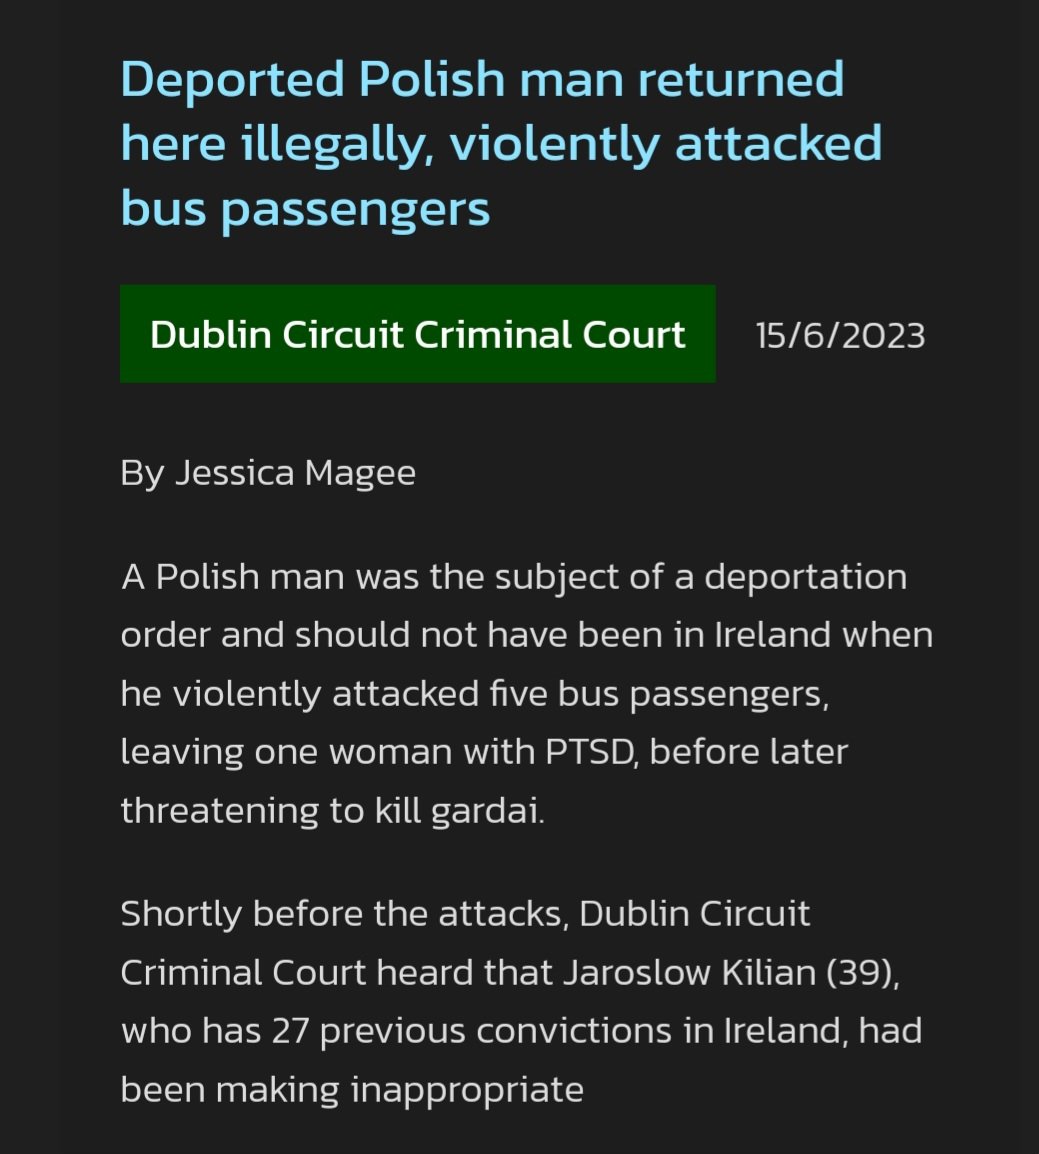 The dangers of failed deportation orders.

This man shouldn't have been here to carry this attack out.

All deportation orders should be adhered to. When issued the Gardaí should be lifting them and sending them home.

#MakeIrelandSafeAgain